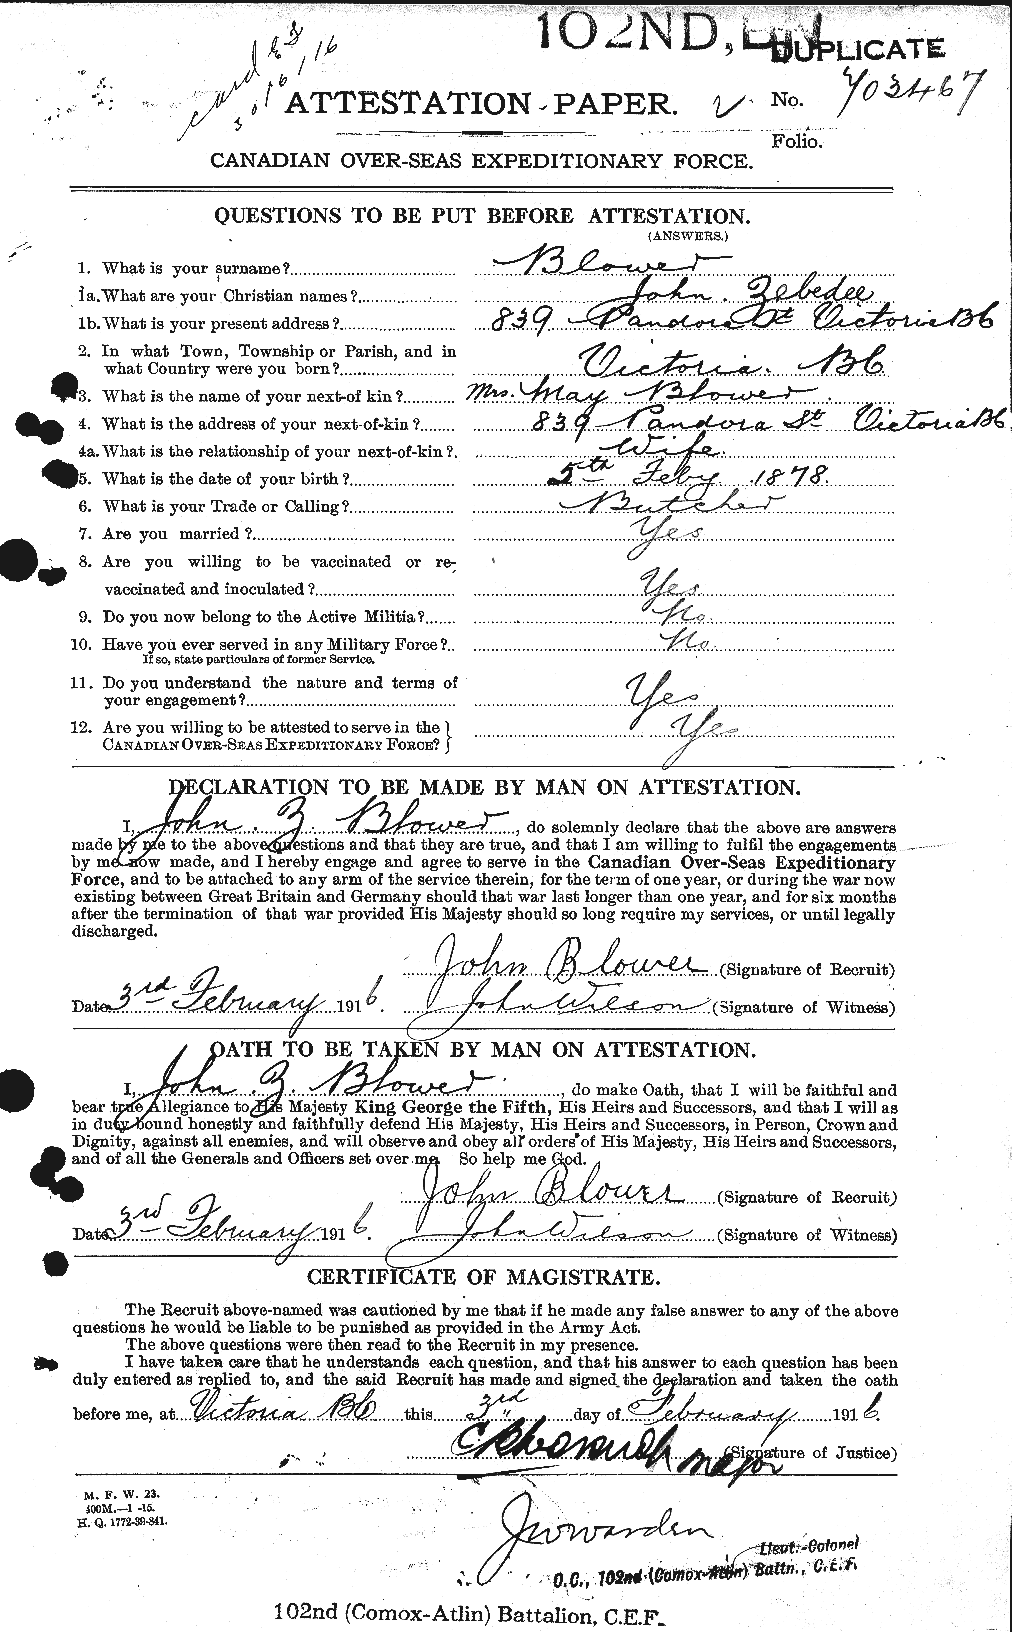 Personnel Records of the First World War - CEF 247439a